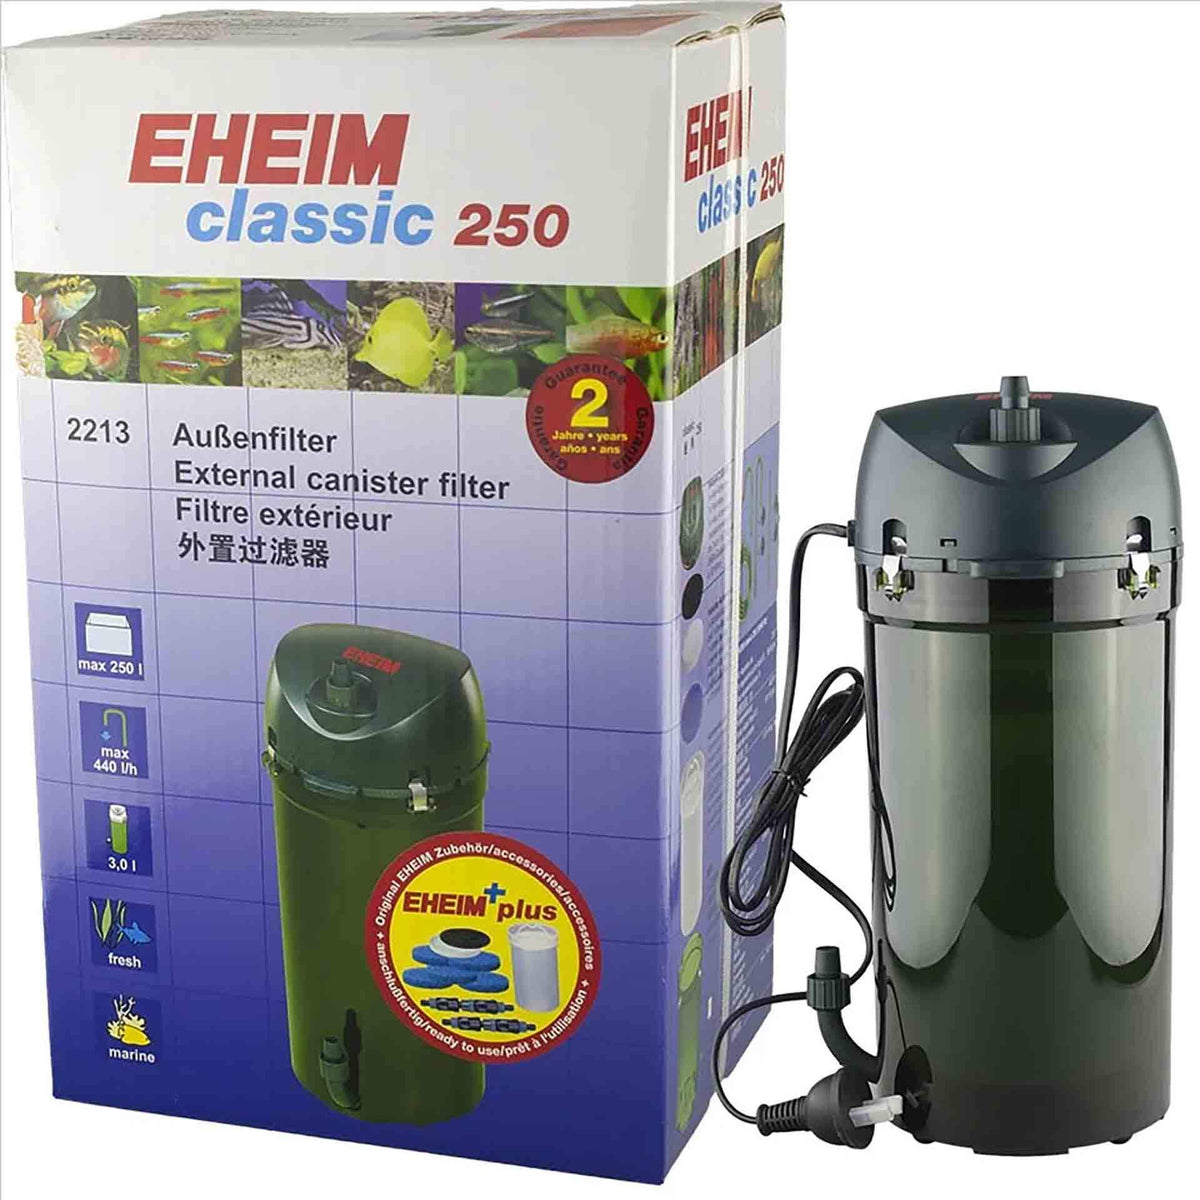 Eheim Classic 250 - 2213 (With Sponge Media) Canister Filter